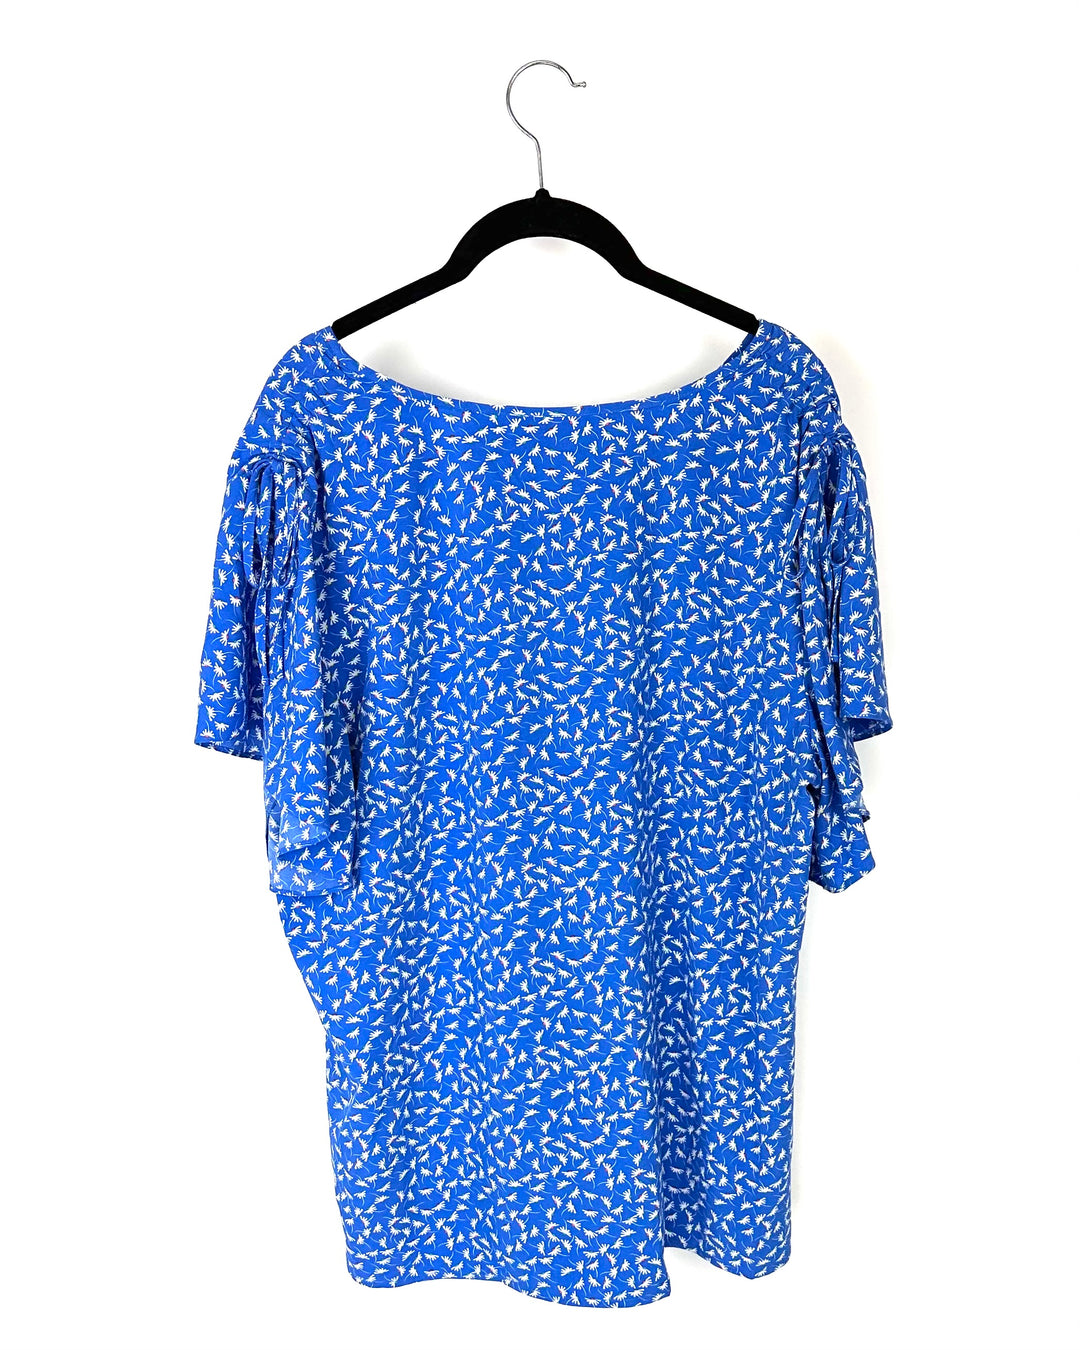 Blue Floral Short-Sleeve Blouse With Adjustable Ruch Sleeves - Size 14-16